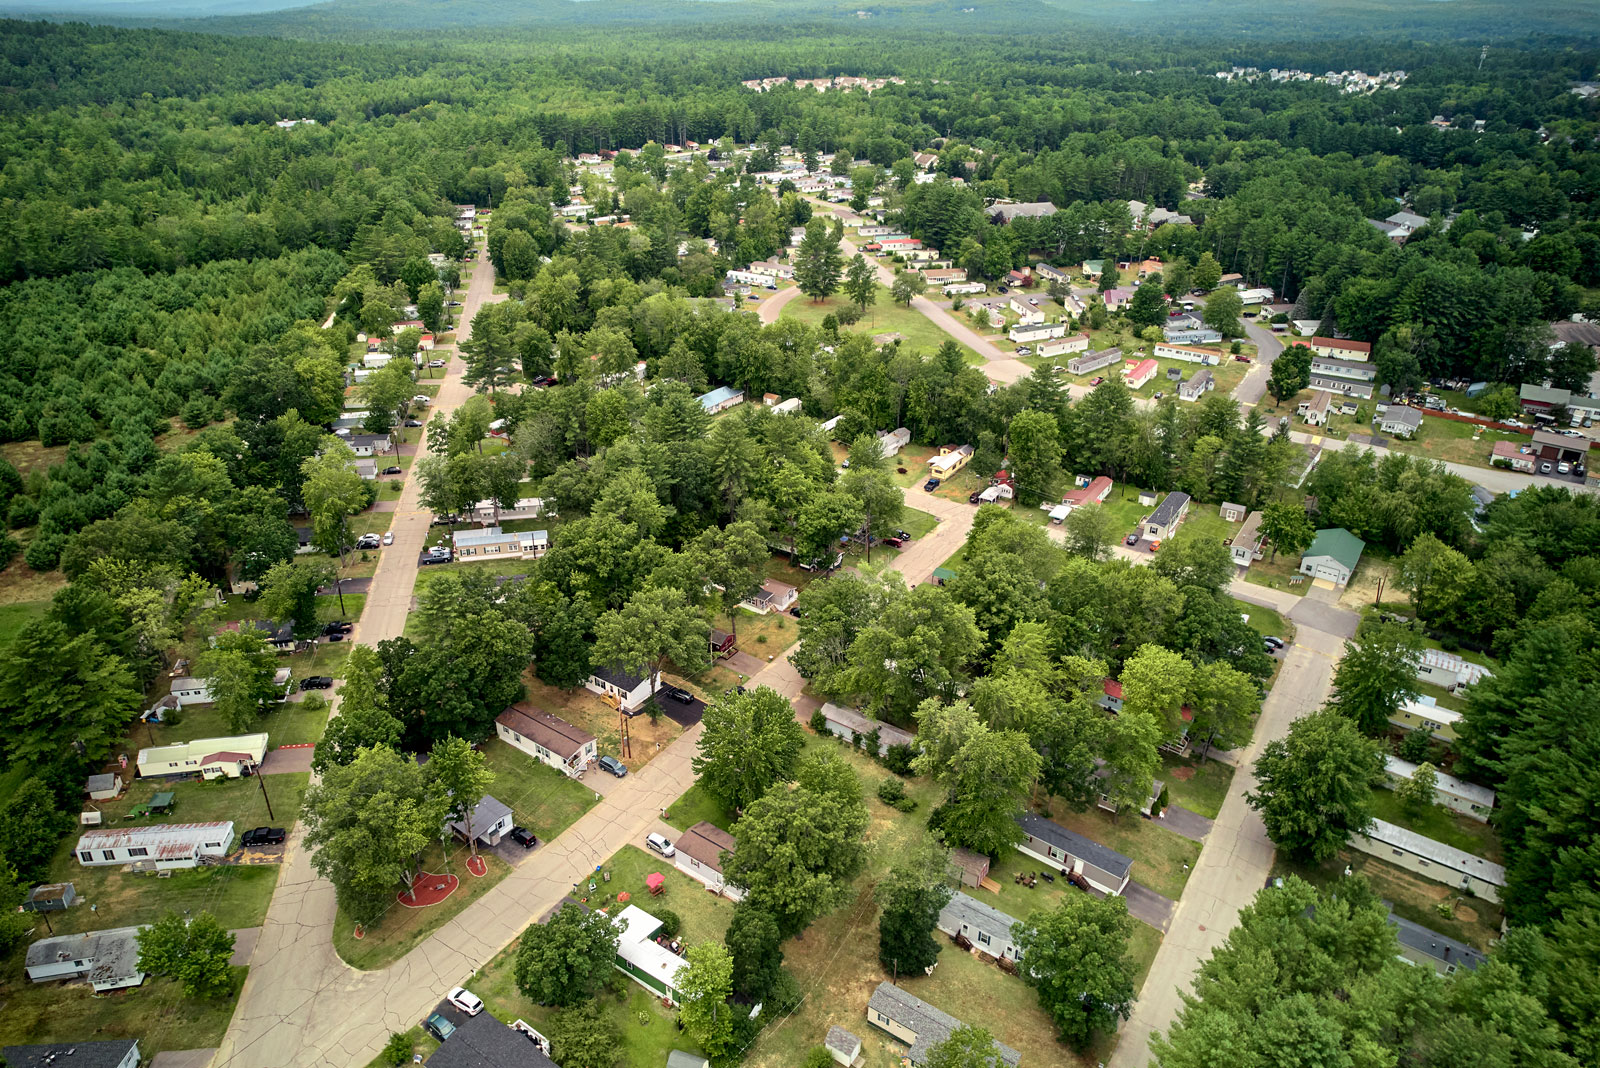 Aerial view of manufactured-home communities in Concord, NH